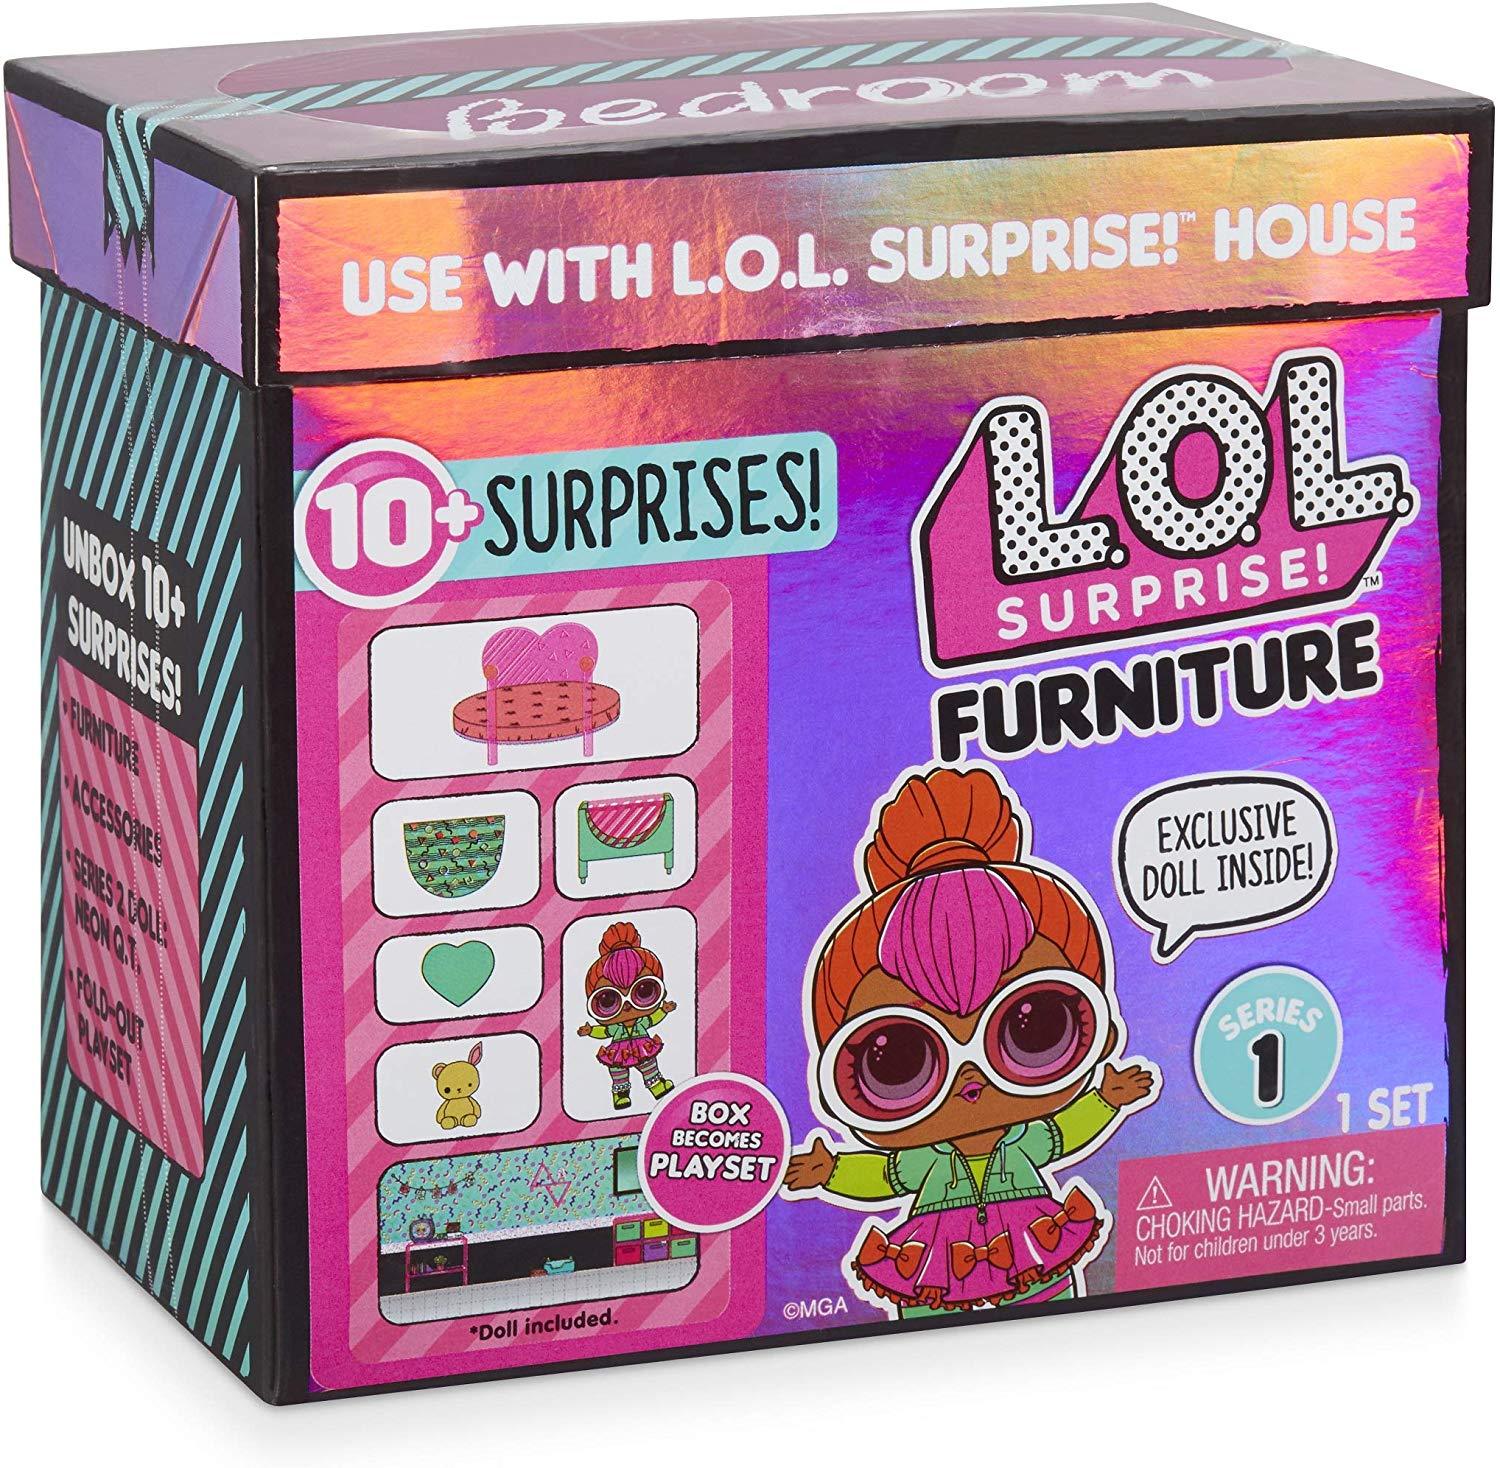 L.O.L Surprise! Furniture Bedroom with Neon 10+ Surprises, Multi Anne Claire Baby Store 